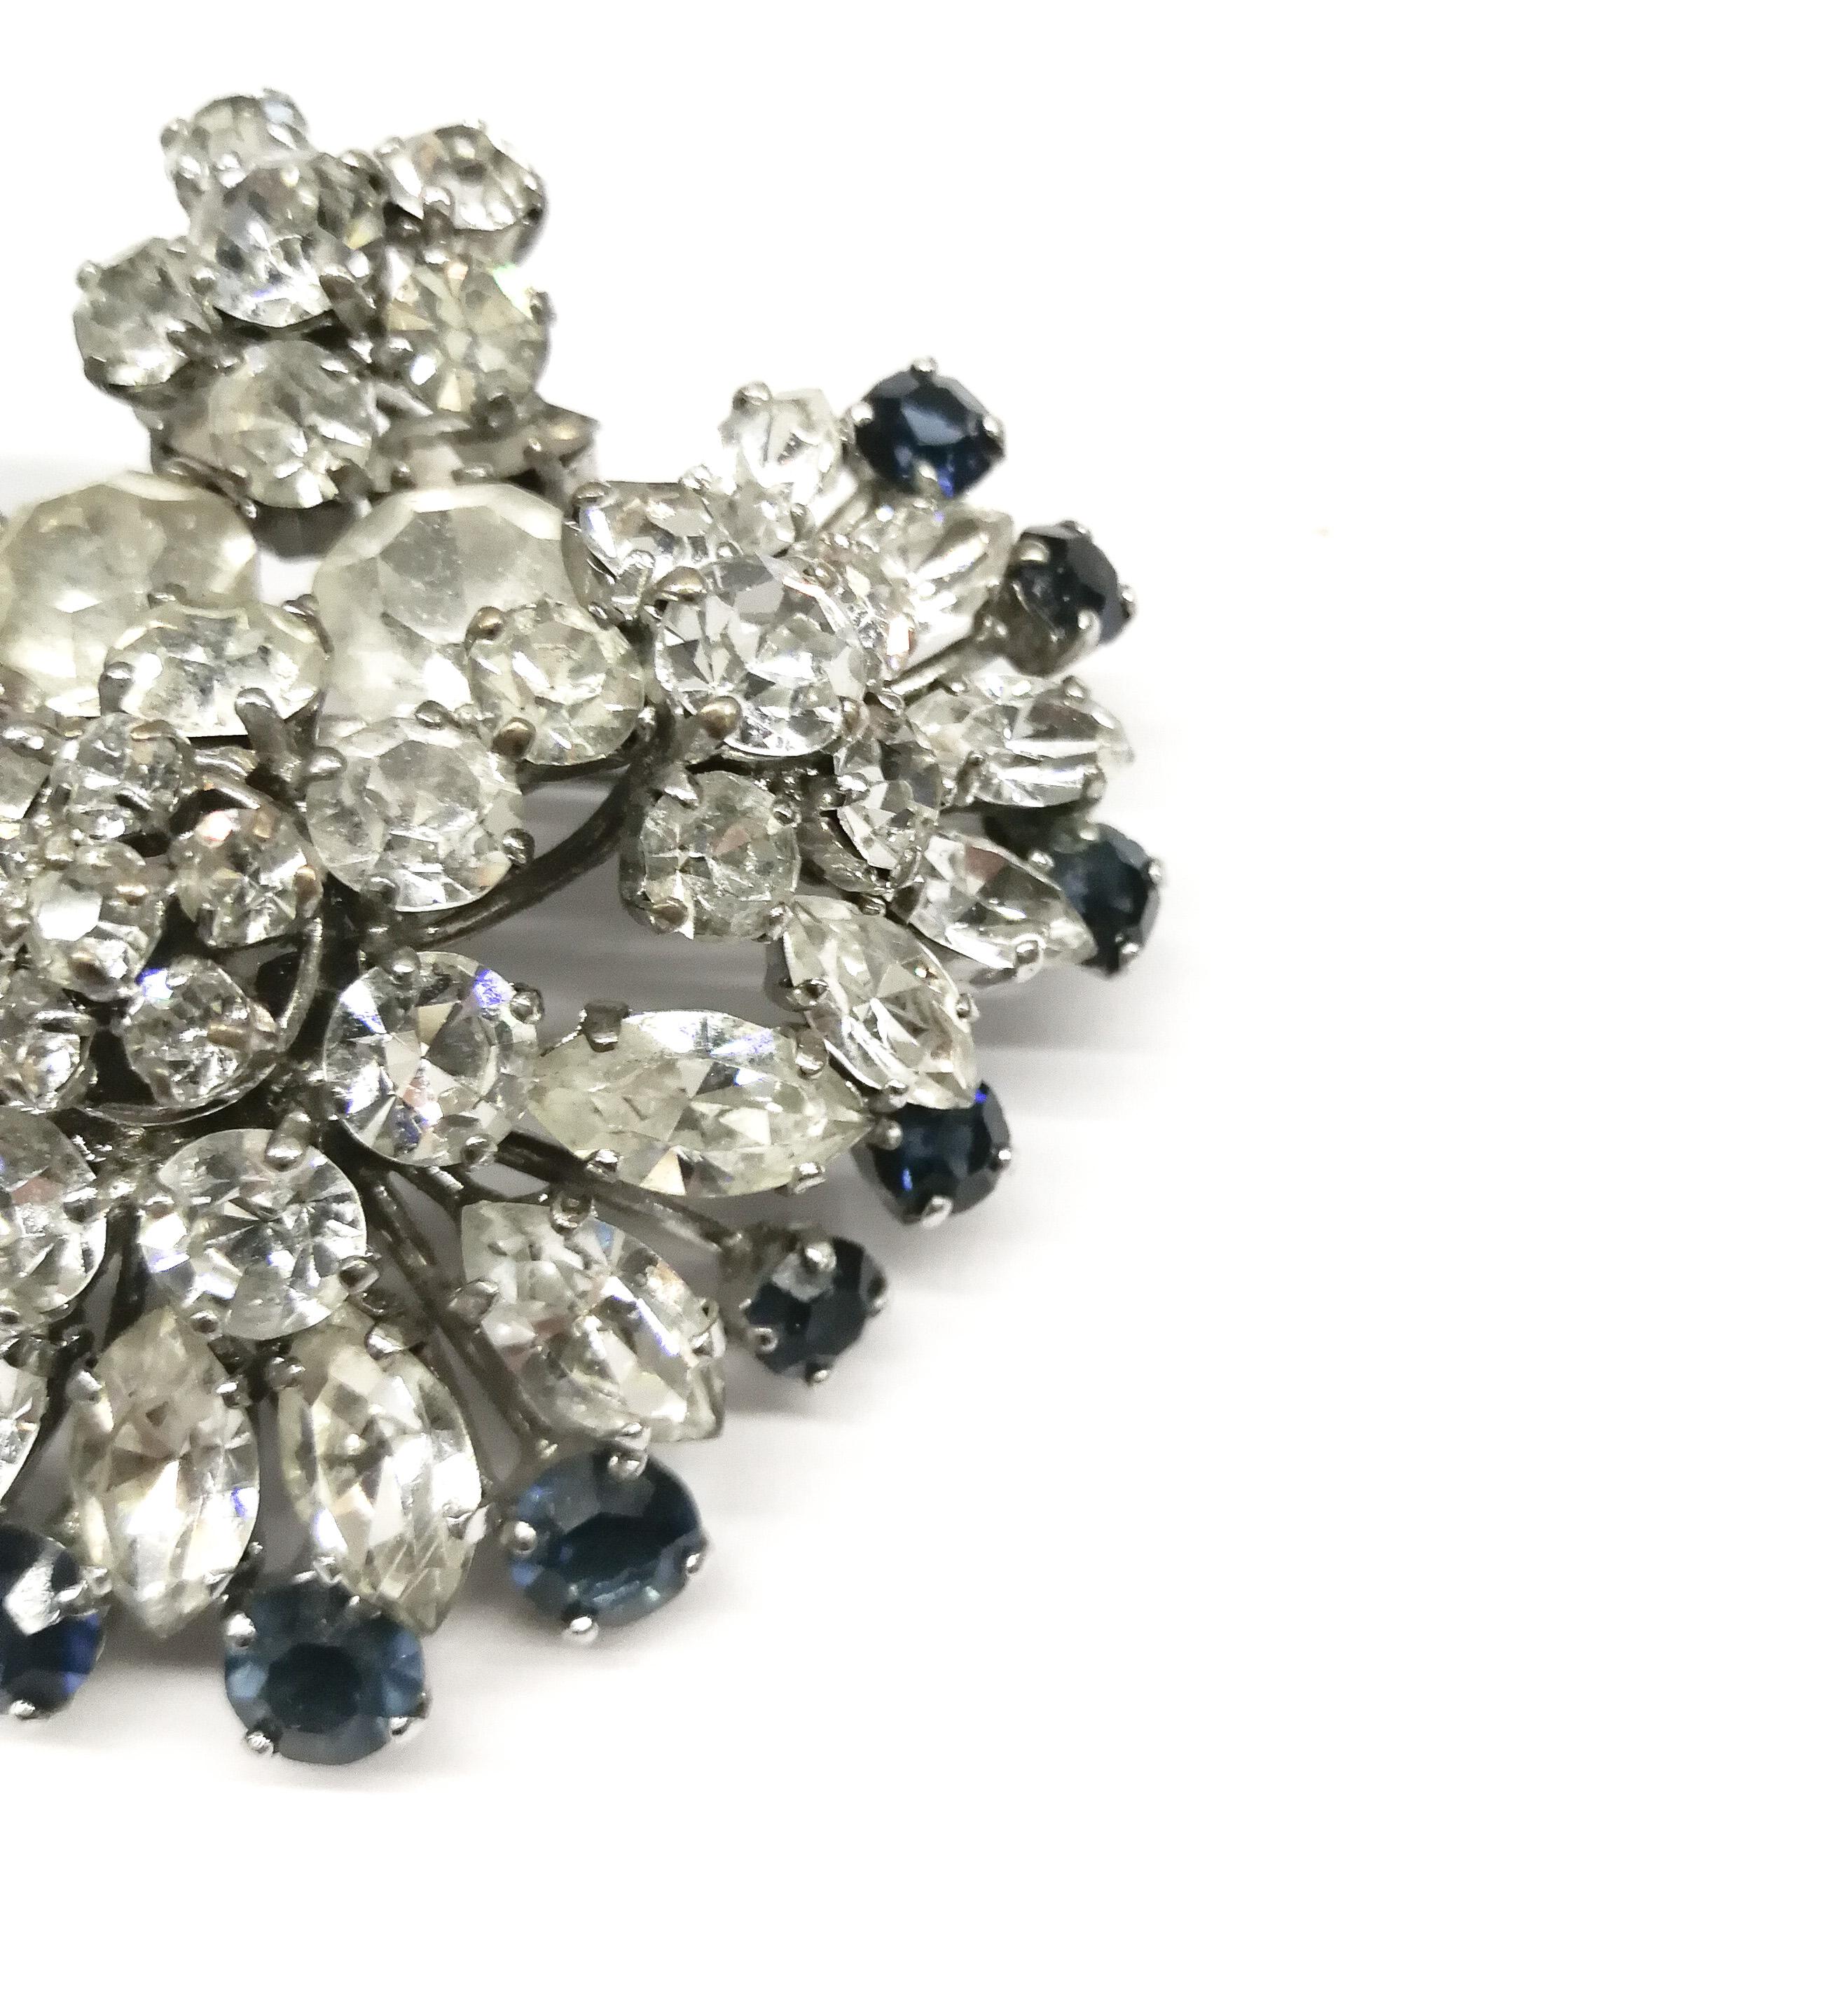 A striking brooch, made by Henkel and Grosse for Christian Dior in 1959 (the brooch is marked and dated). Charming and glamorous, it is very three dimensional, consisting of mainly clear pastes with sapphire pastes around the edge of the brooch. It